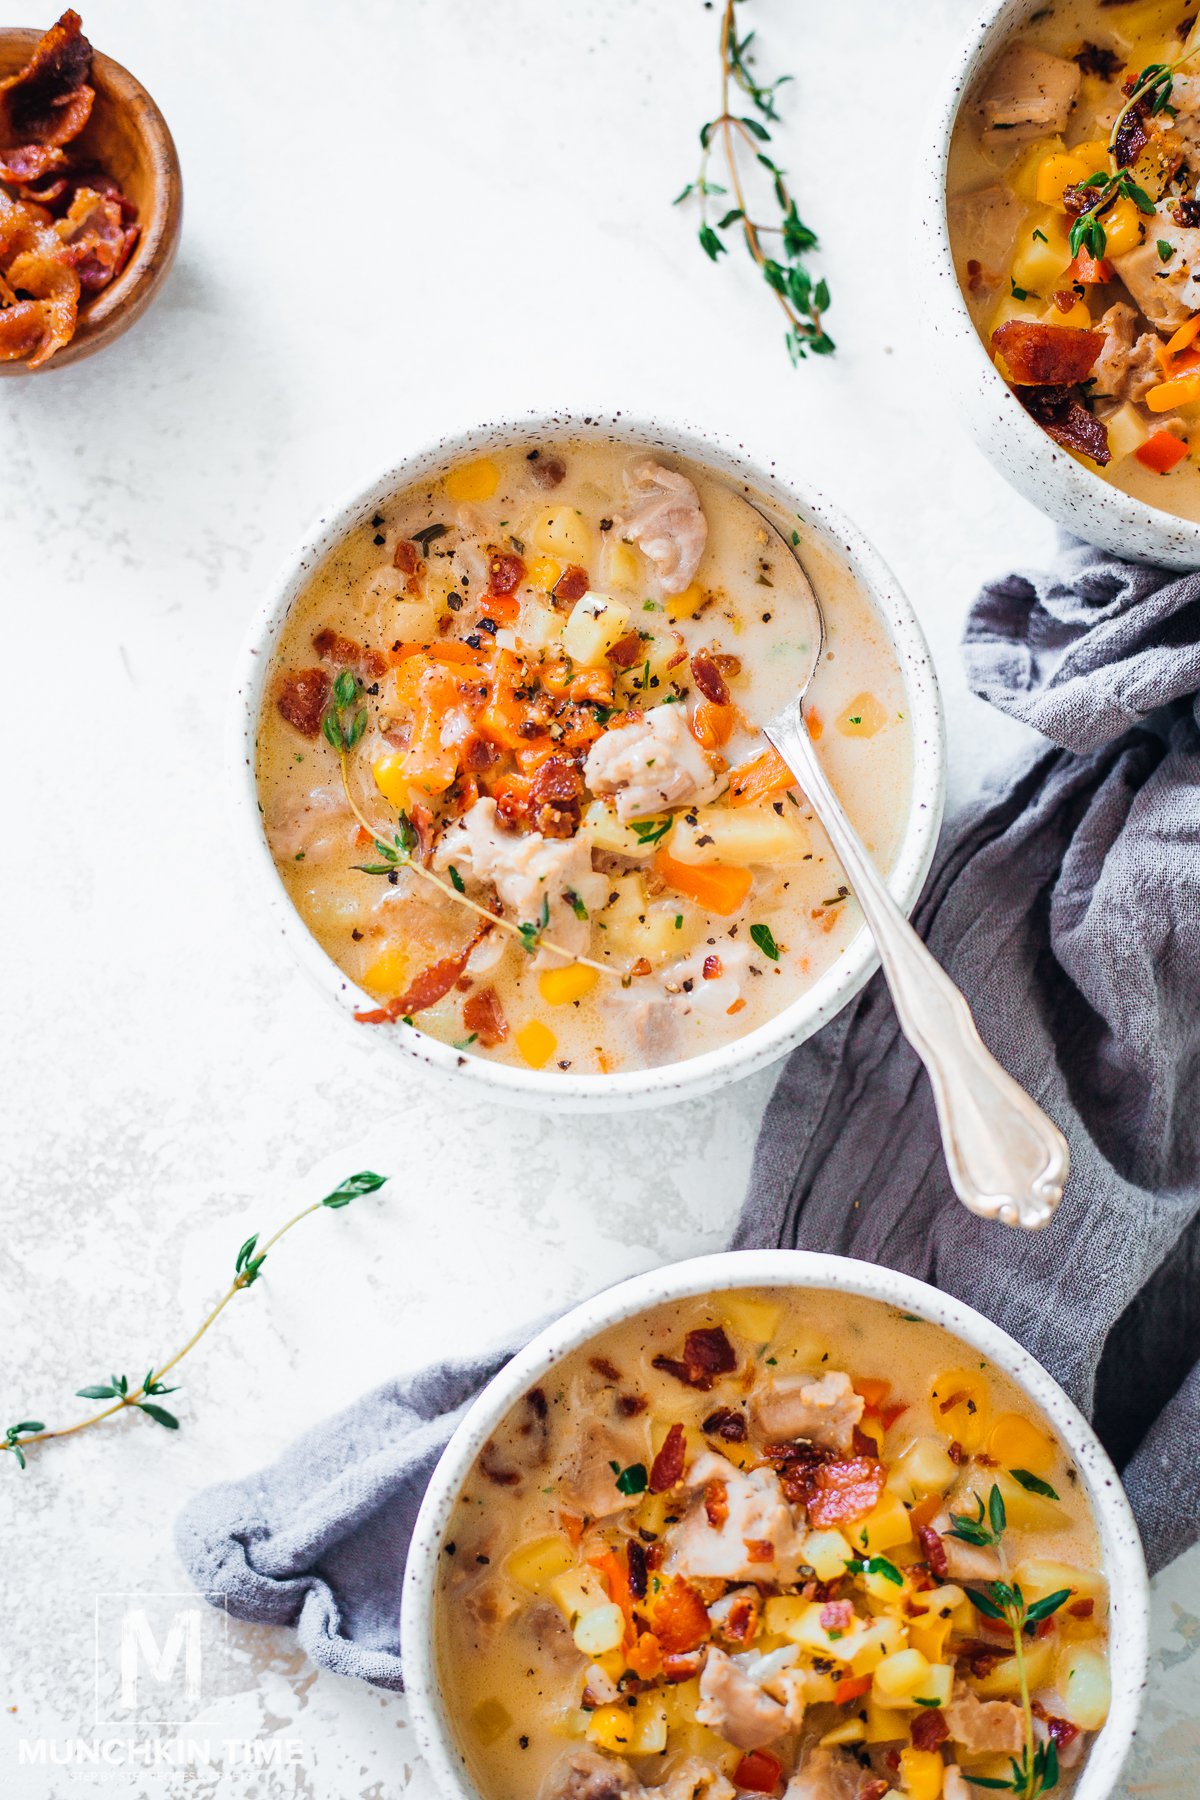 Soup vs Chowder (what's the difference?)